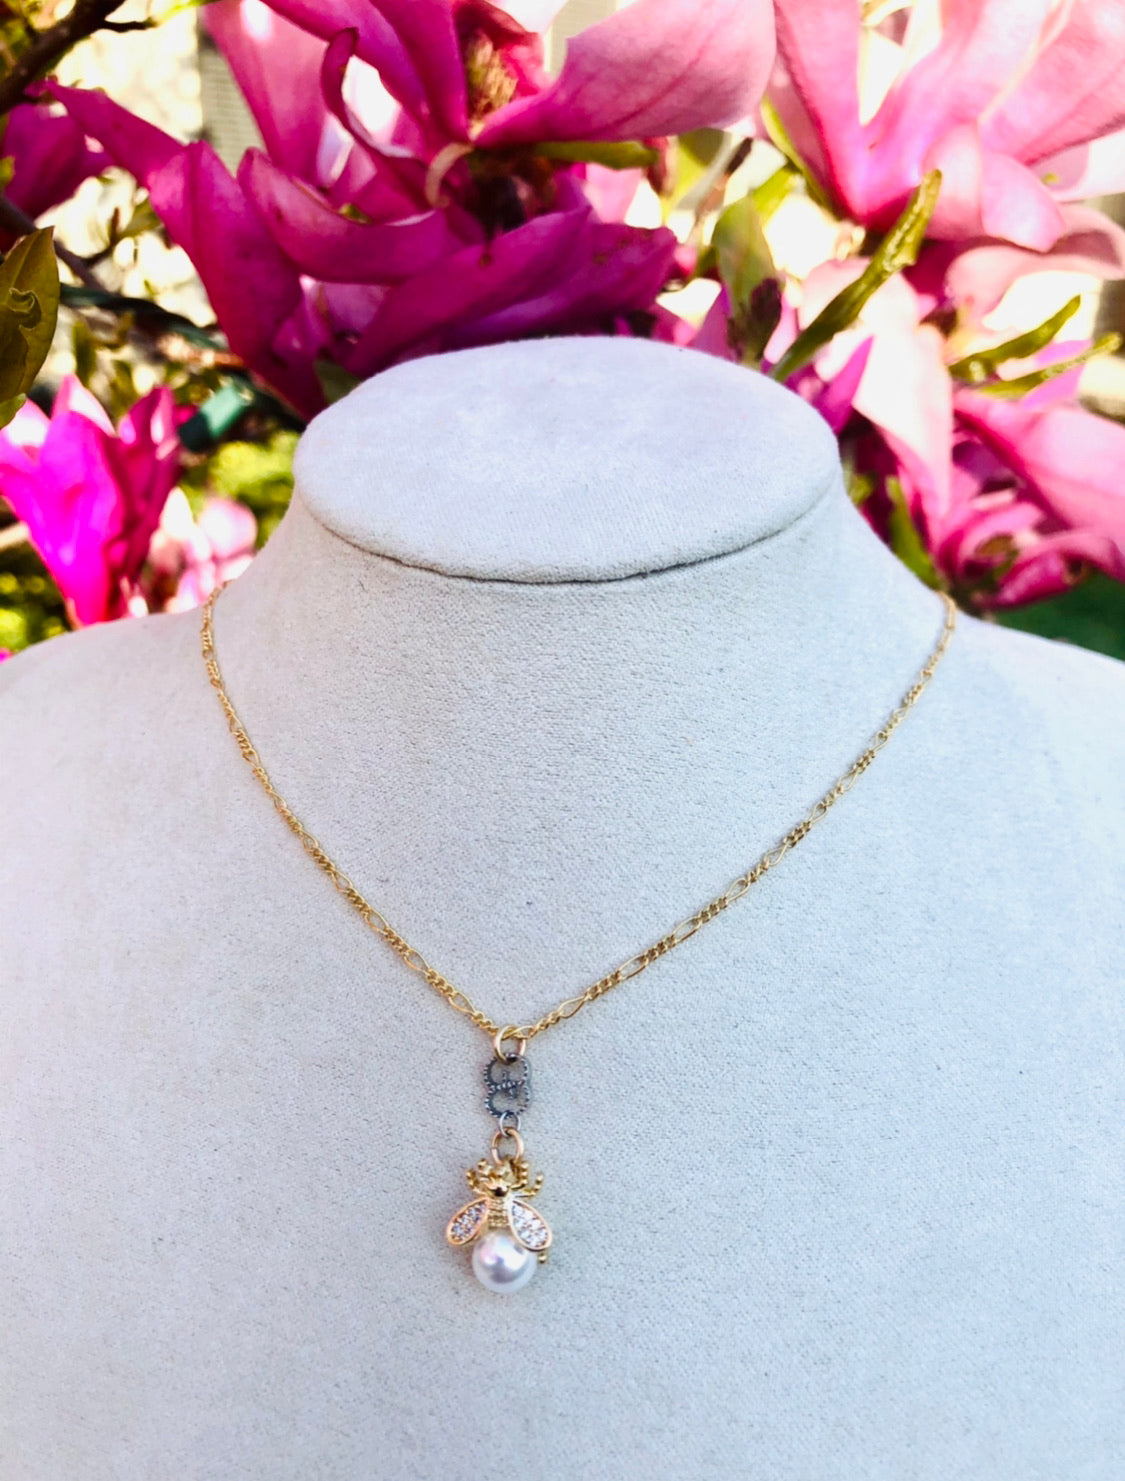 Our Macy's Honey Bee Pendant in Honey Gold is perfectly garnished with  Vanilla Diamonds and a Chocolate Diamonds for the true #Levianista 🐝... |  By LeVian | Facebook